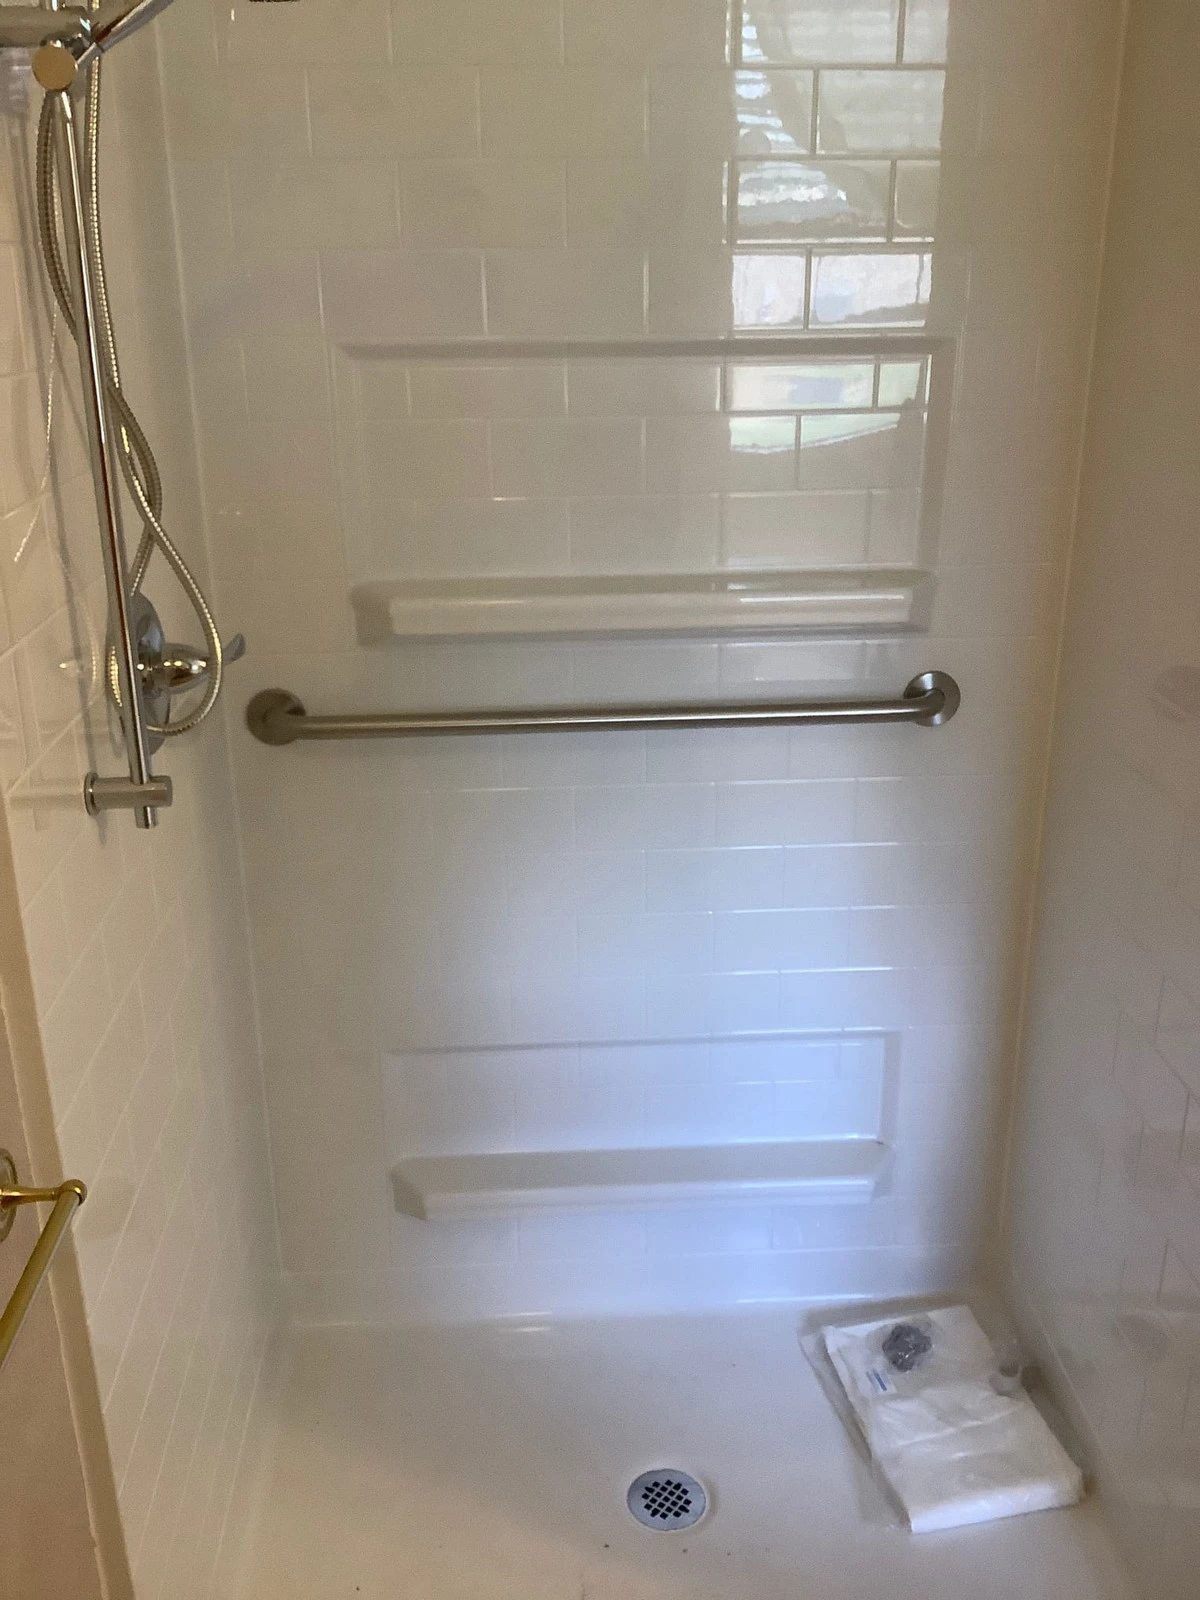 A residential shower before and after it has been remodeled and had accessibility features installed by Mr. Handyman.